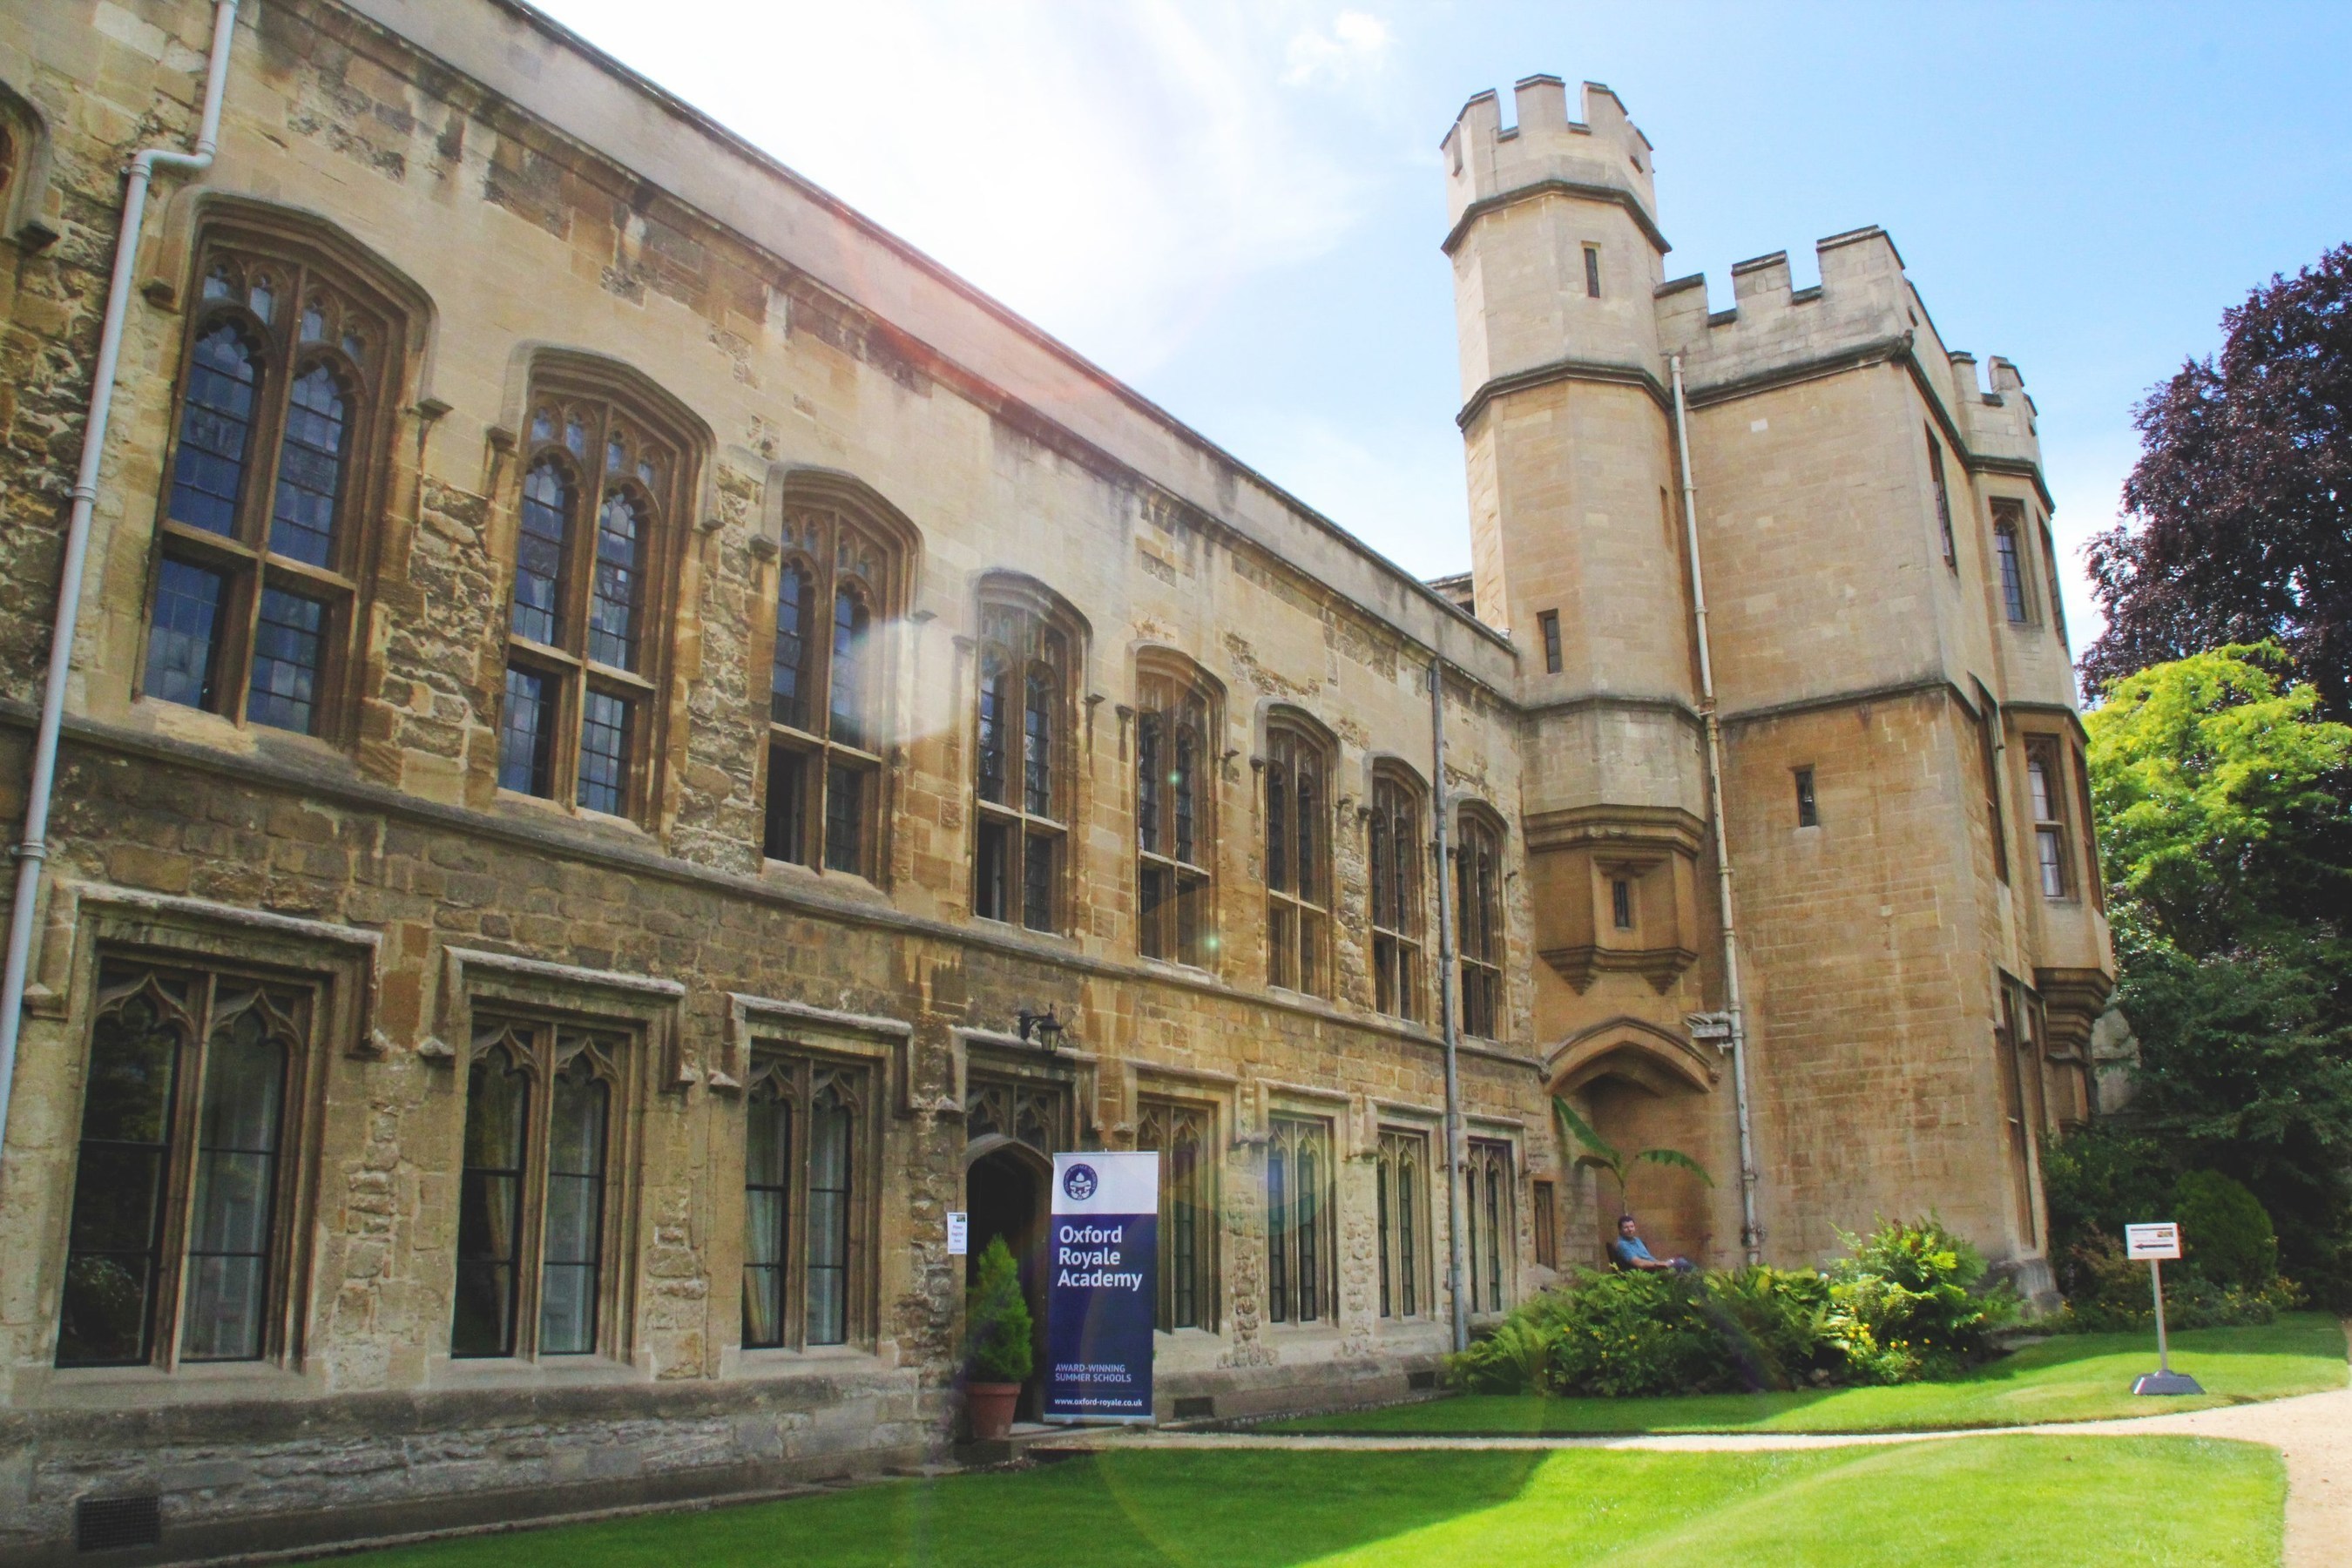 Students are housed in University of Oxford accommodation for the duration of their summer programmes.